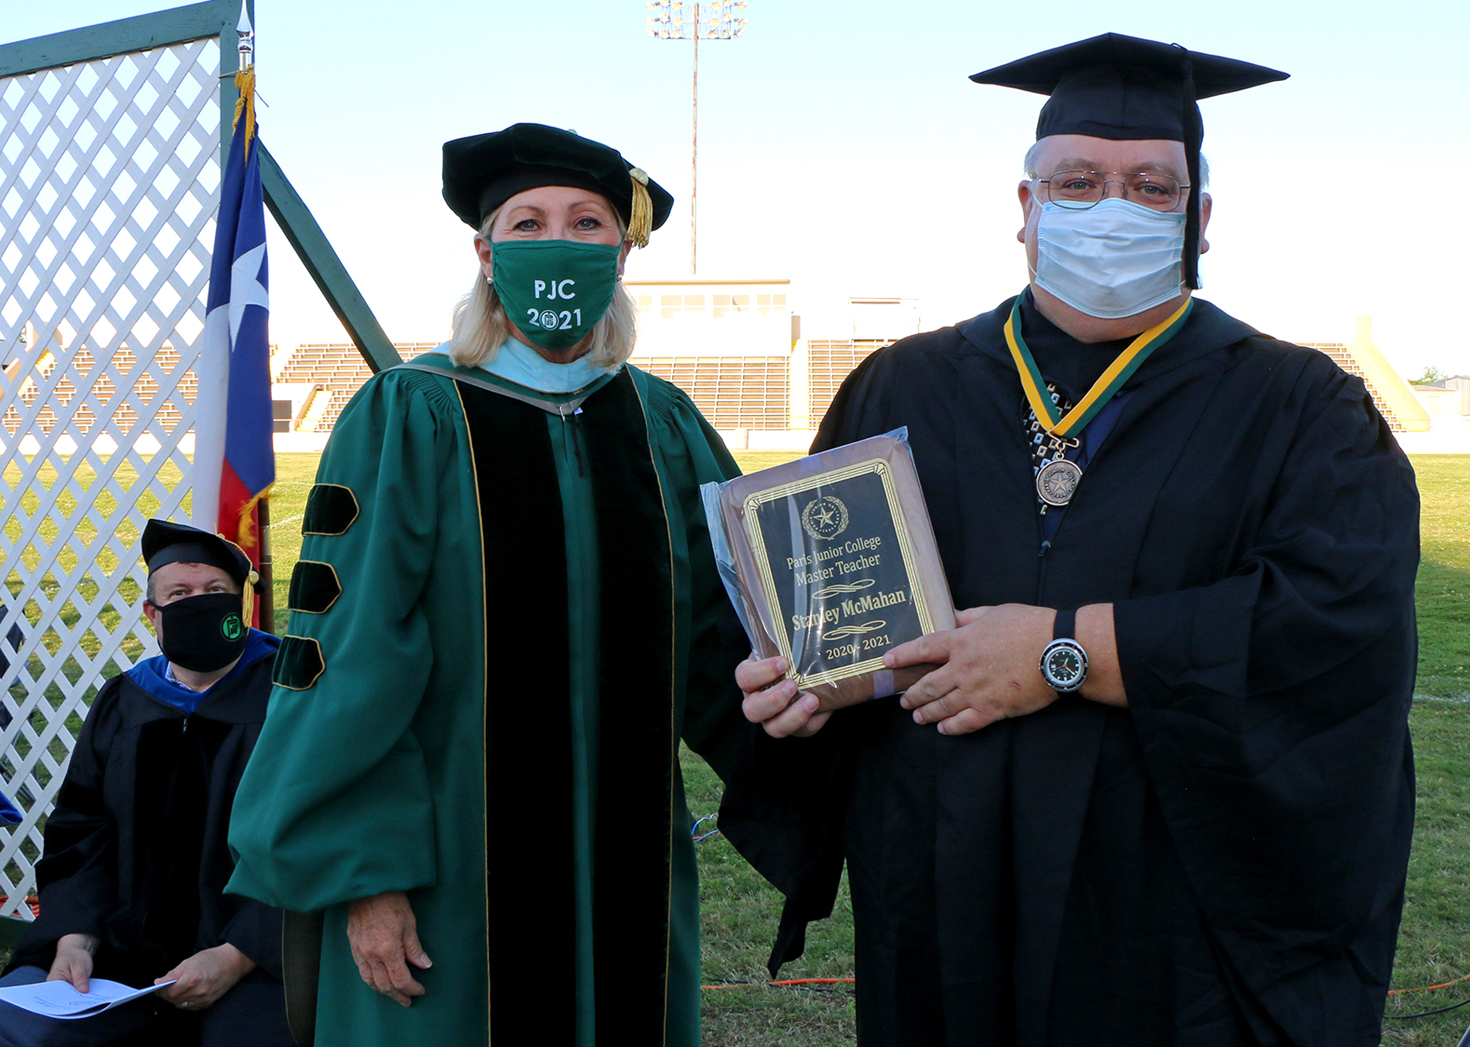 96th PJC graduation celebrates students, teaching excellence